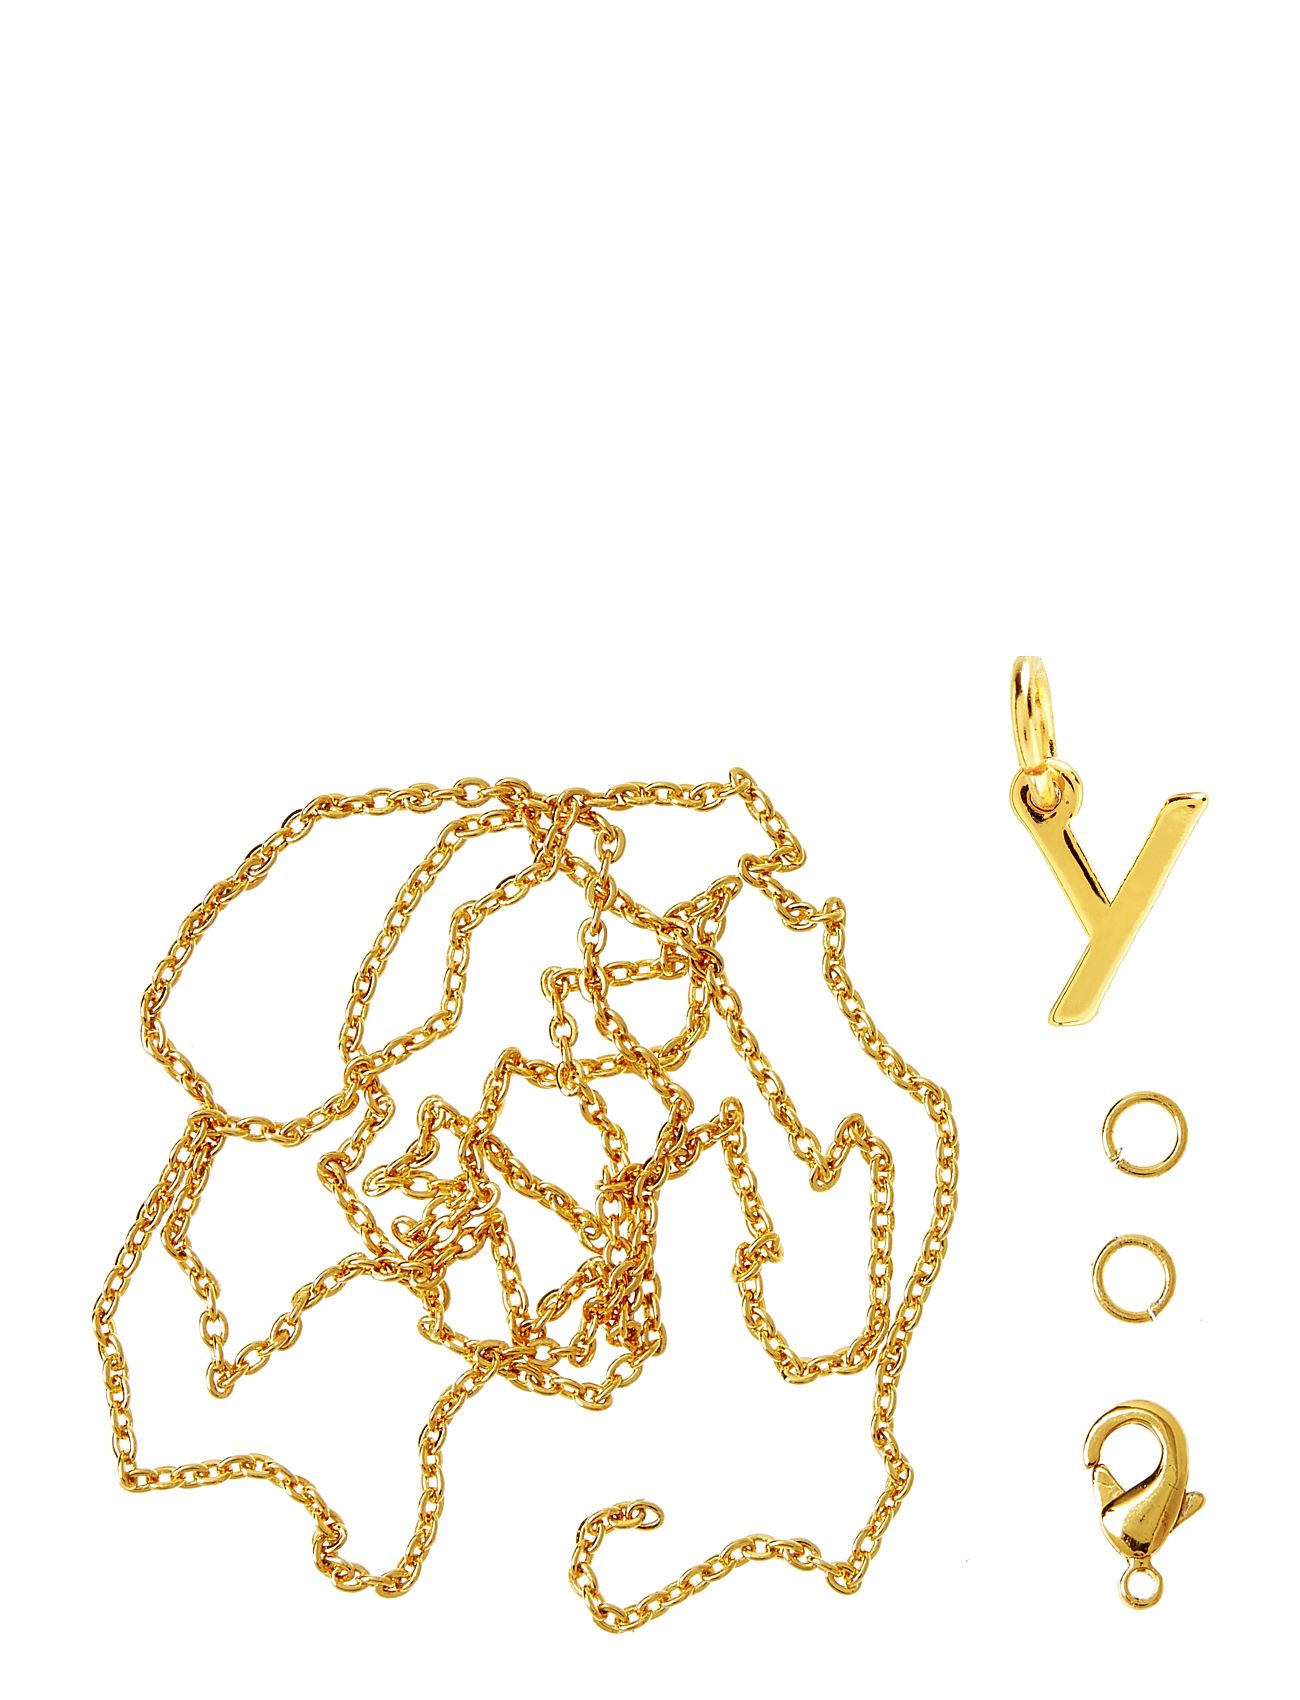 Letter Y Gp With O-Ring, Chain And Clasp Toys Creativity Drawing & Crafts Craft Jewellery & Accessories Gold Me & My Box